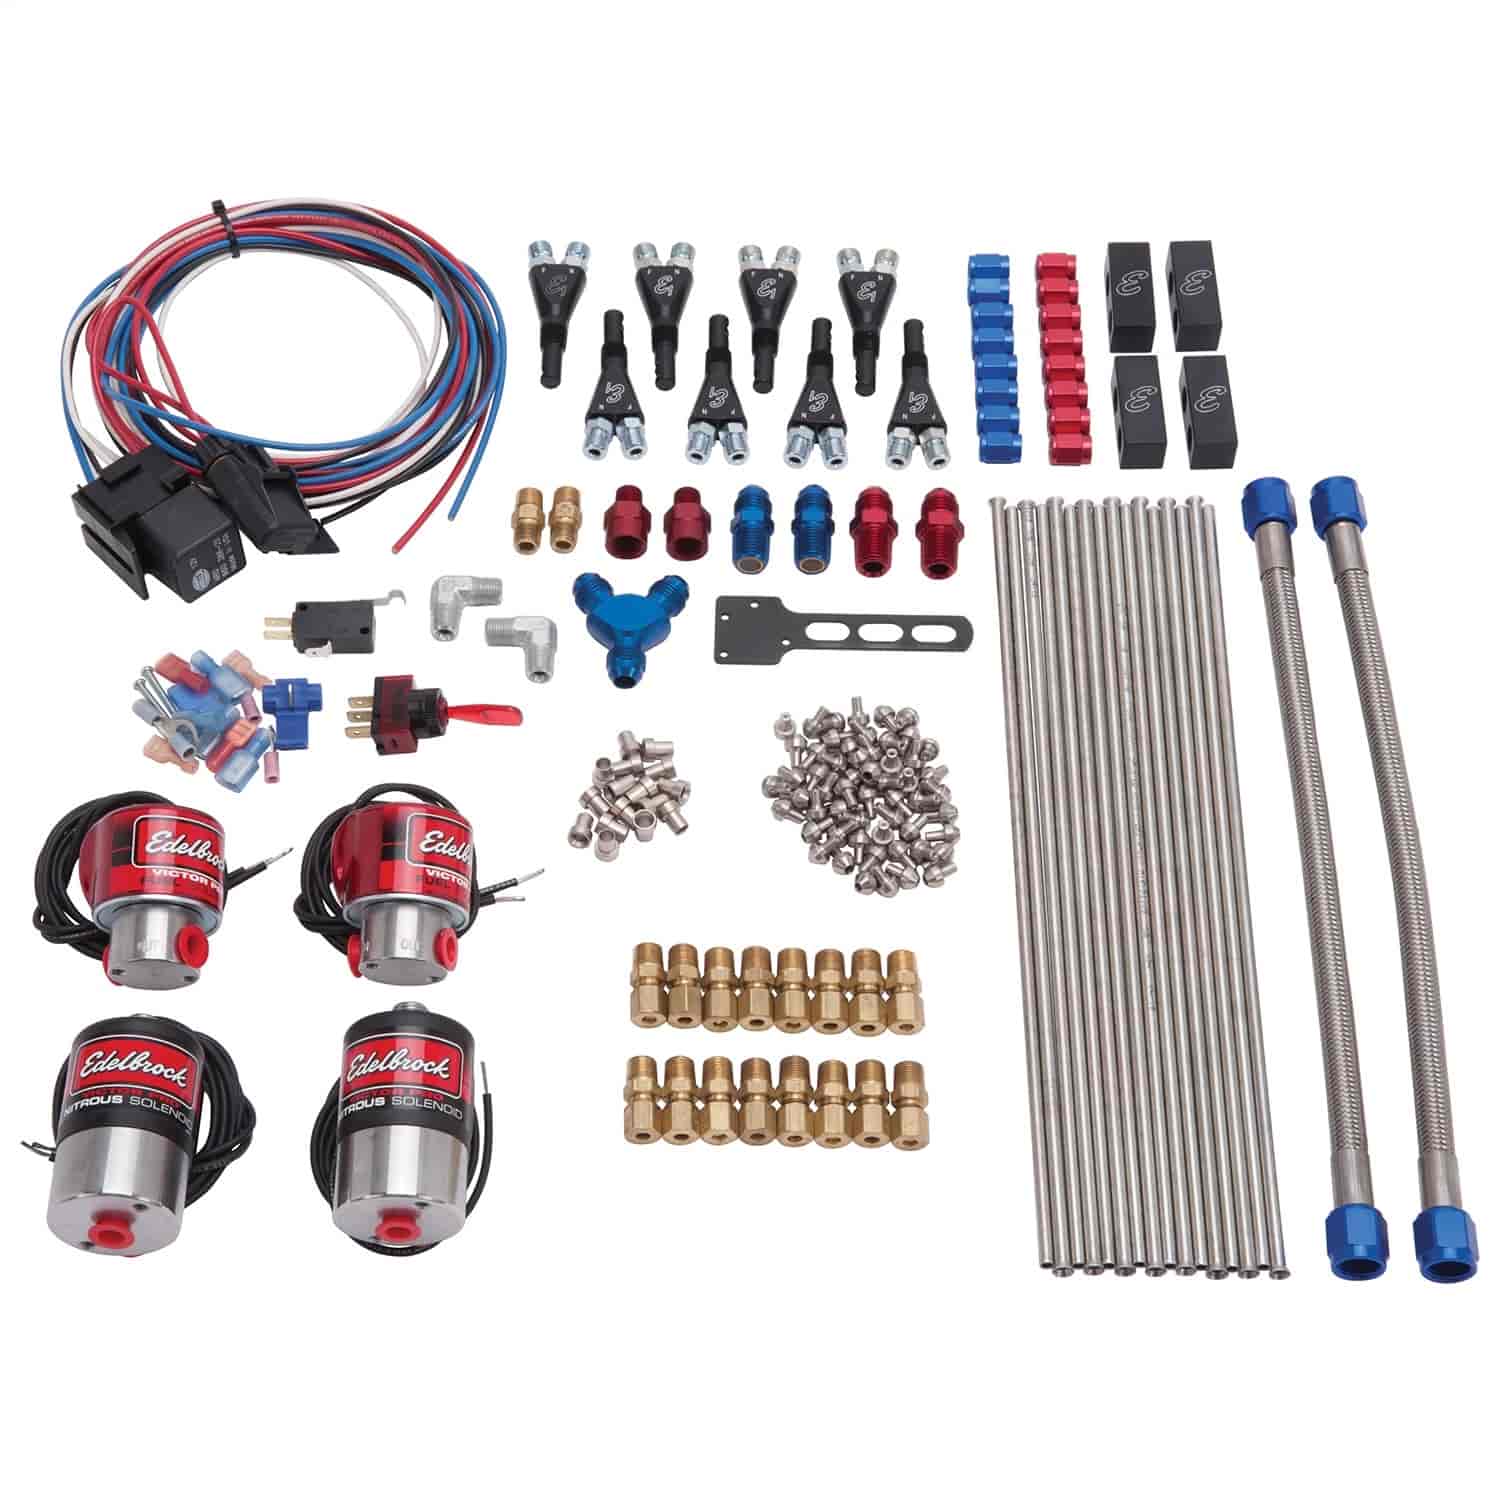 Super Victor Direct Port Nitrous Kit for V8 200-500+ HP with E1 Nozzles